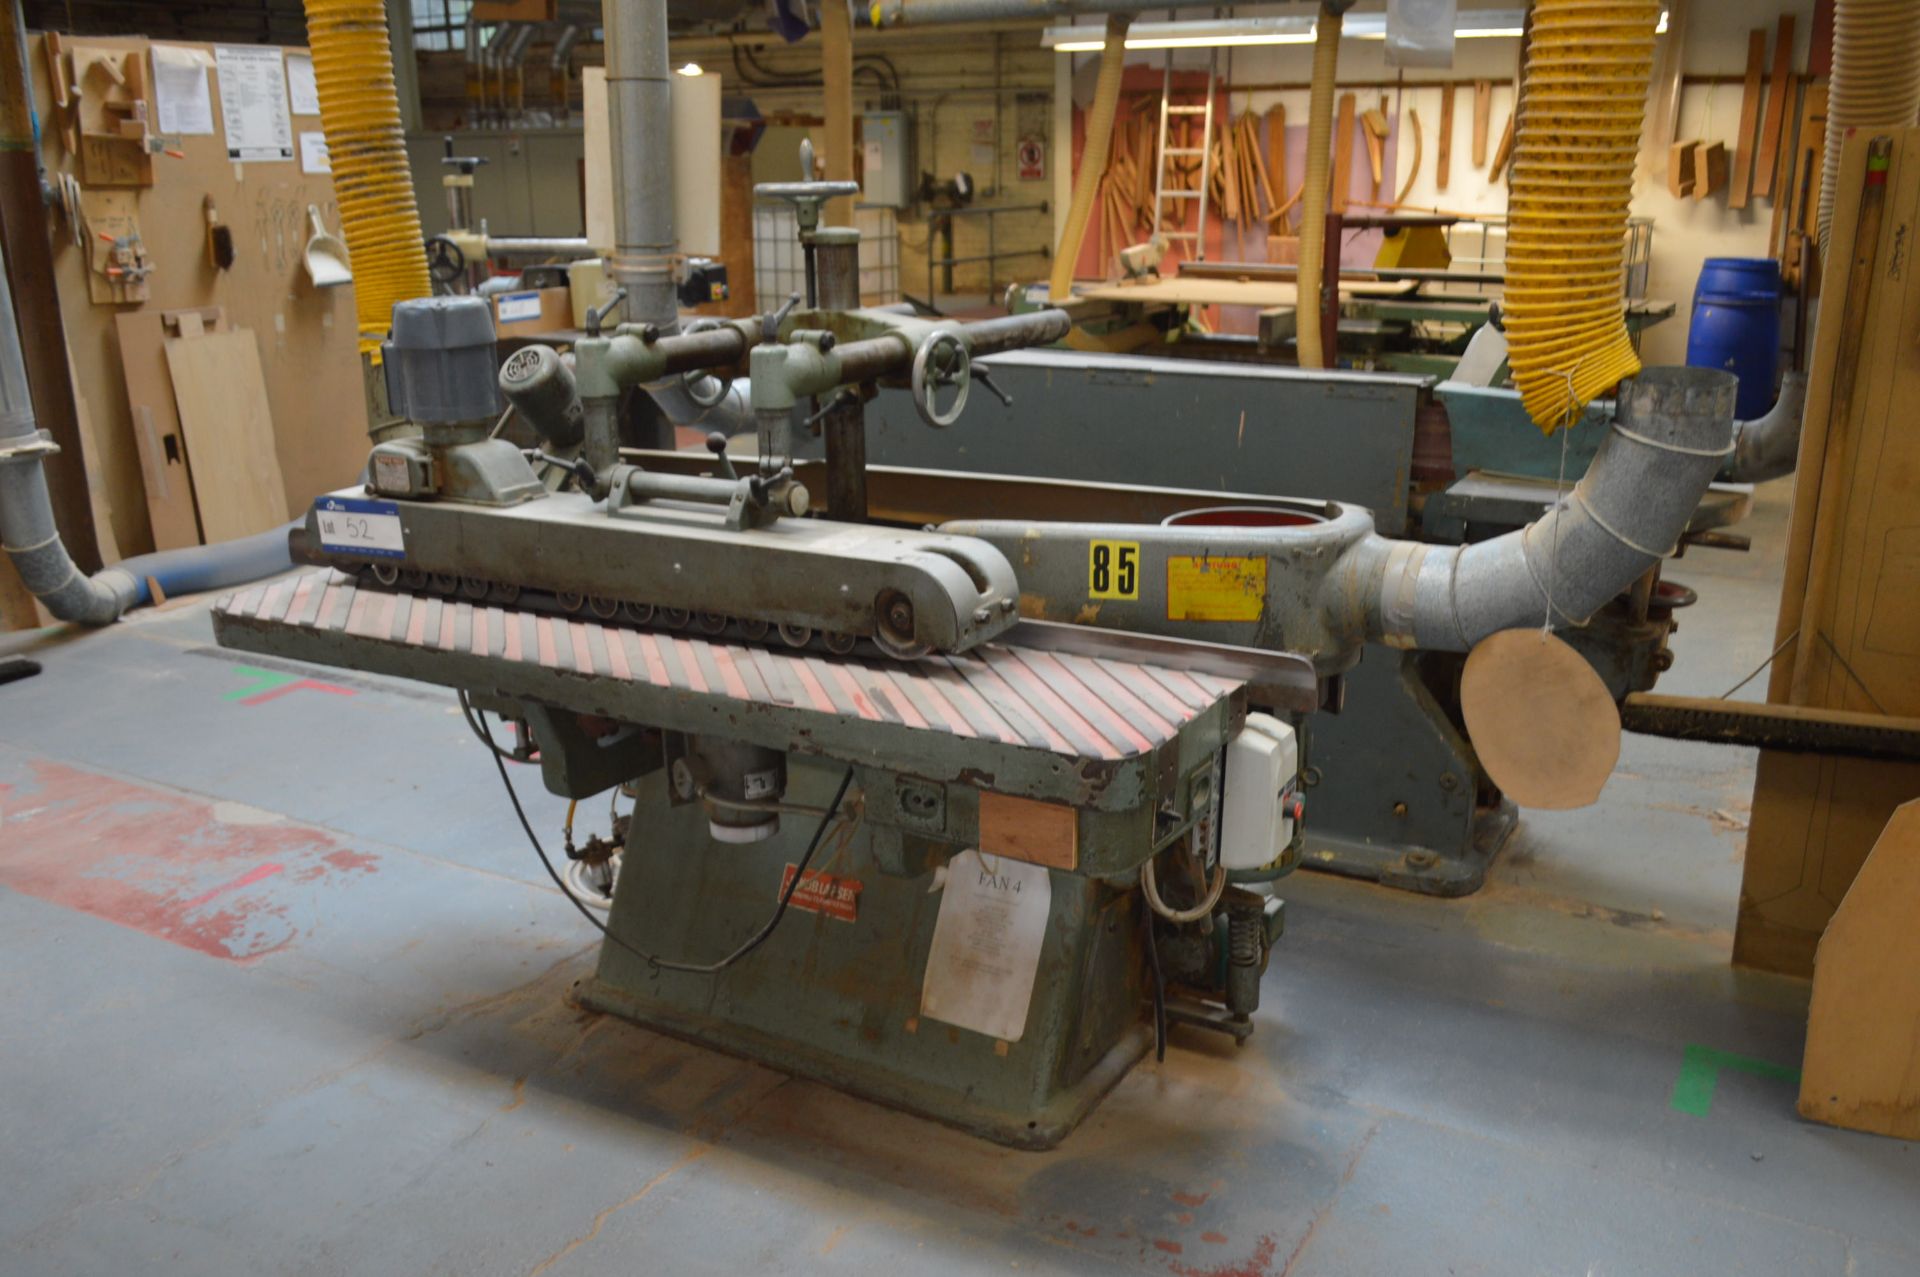 Jakob Larsen EDGE SANDING MACHINE, with Holz-Her ETS power feed unit and flexible ducting